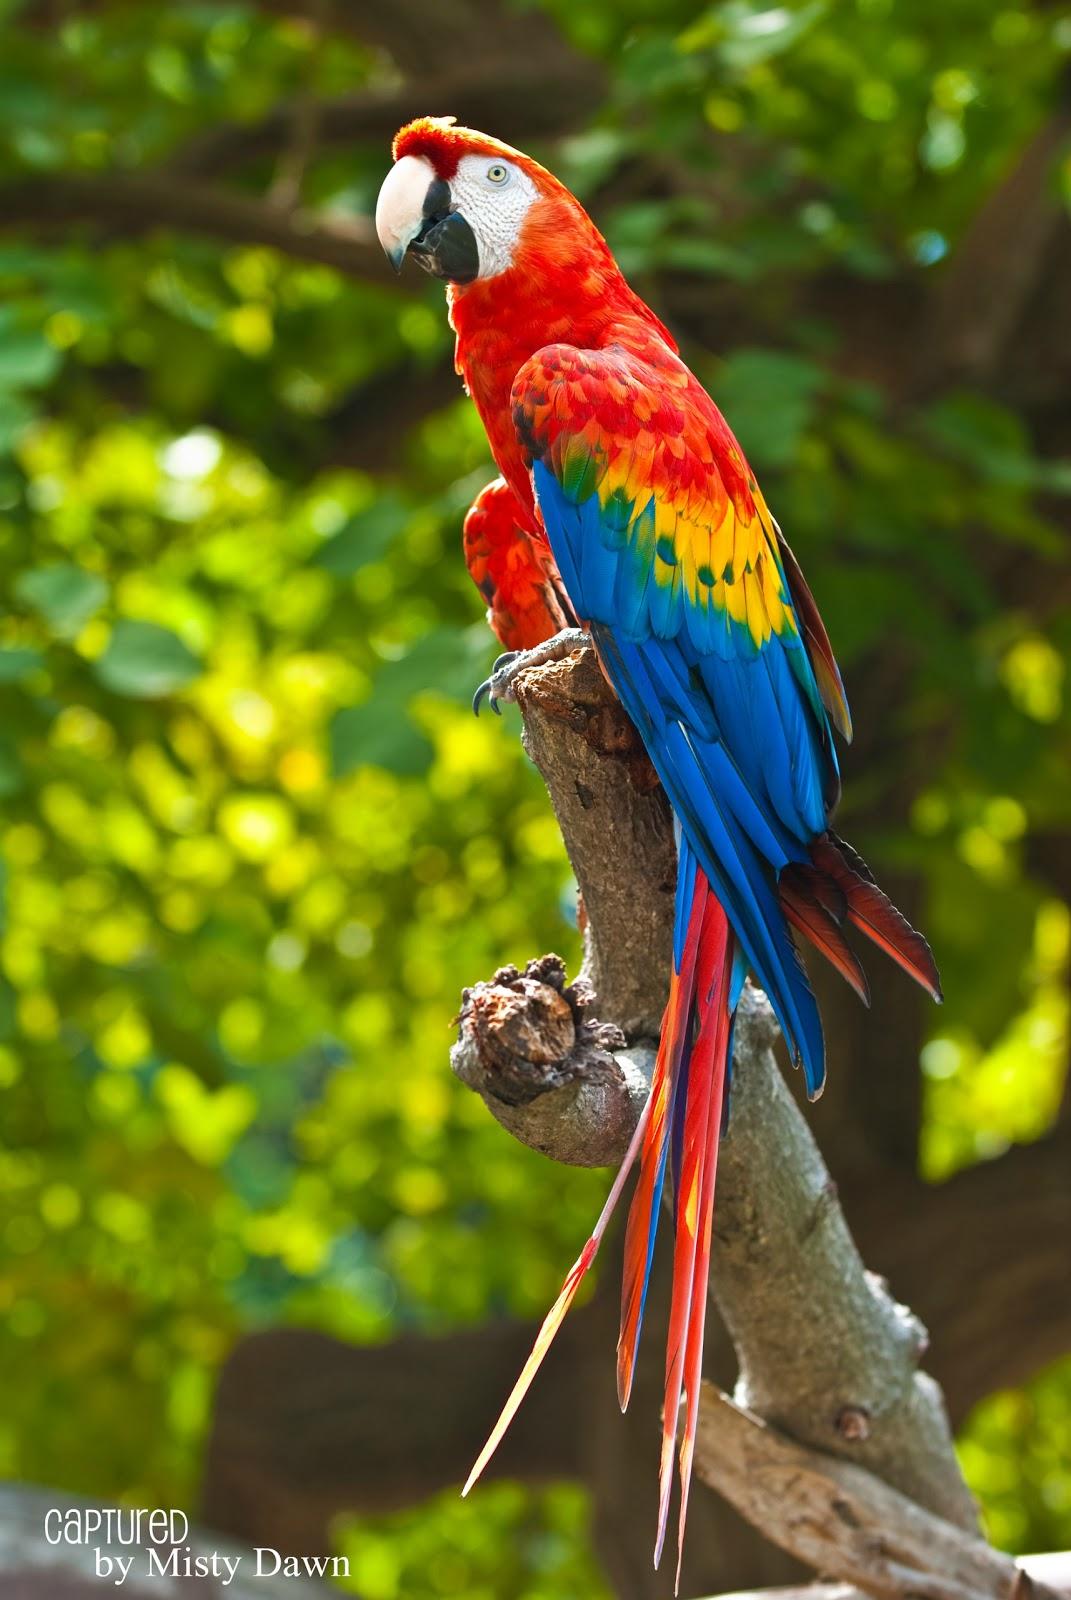 Red-And-Green Macaw Wallpapers